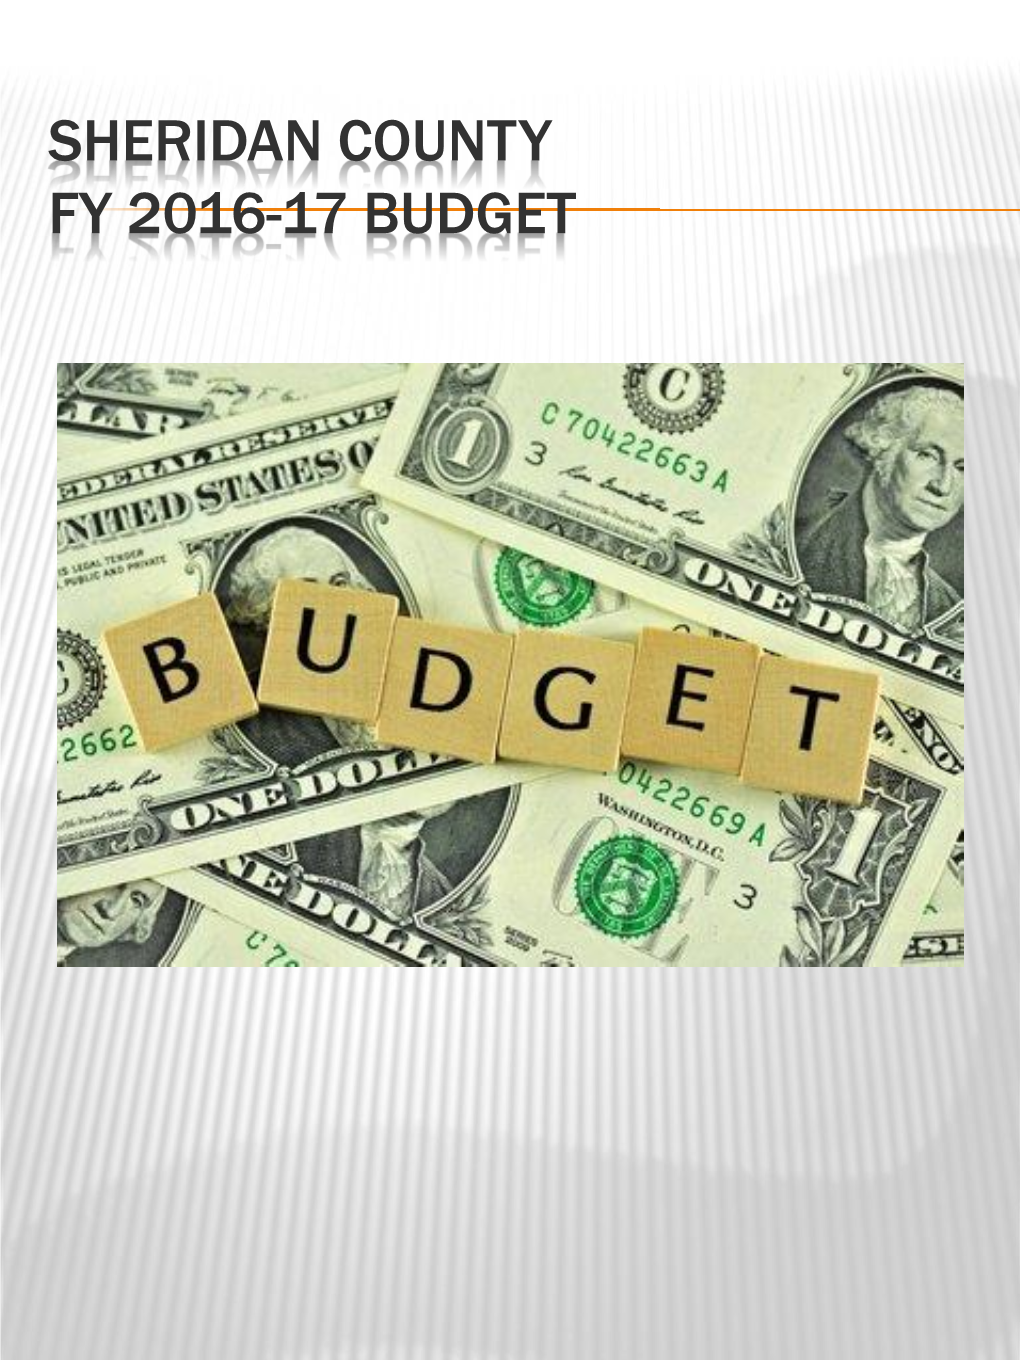 SHERIDAN COUNTY FY 2016-17 BUDGET Budget Message FY 2016-17